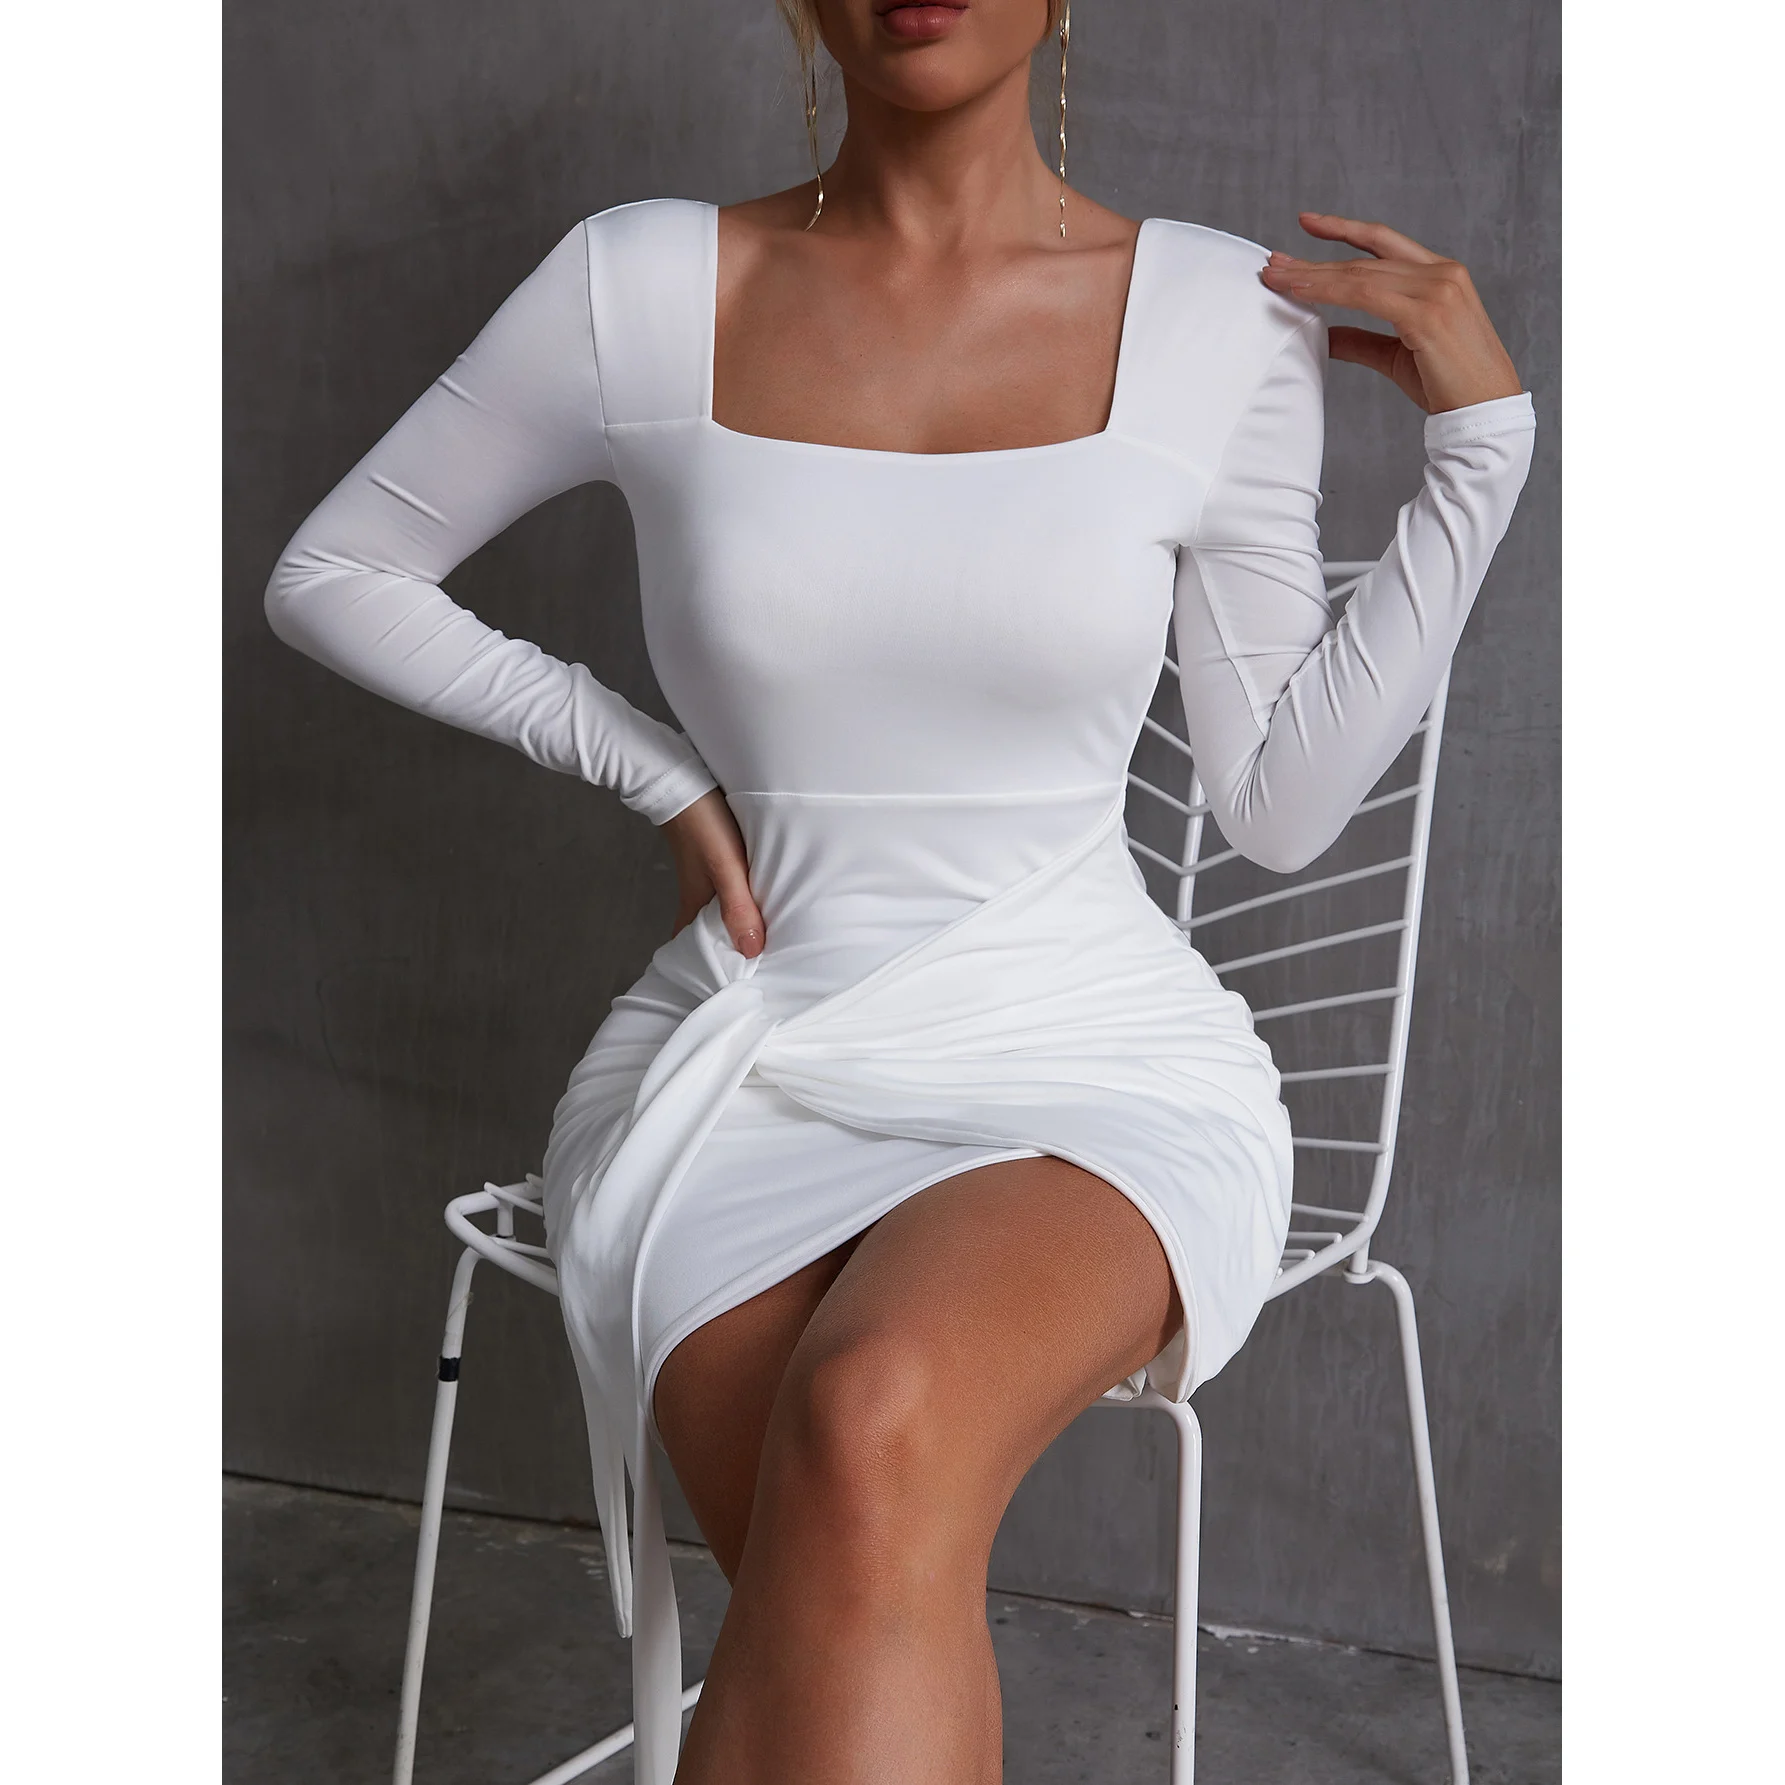 

Classic design blazer street wear soft and skin-friendly xs - l sizes plain white color young lady dress, Picture shown